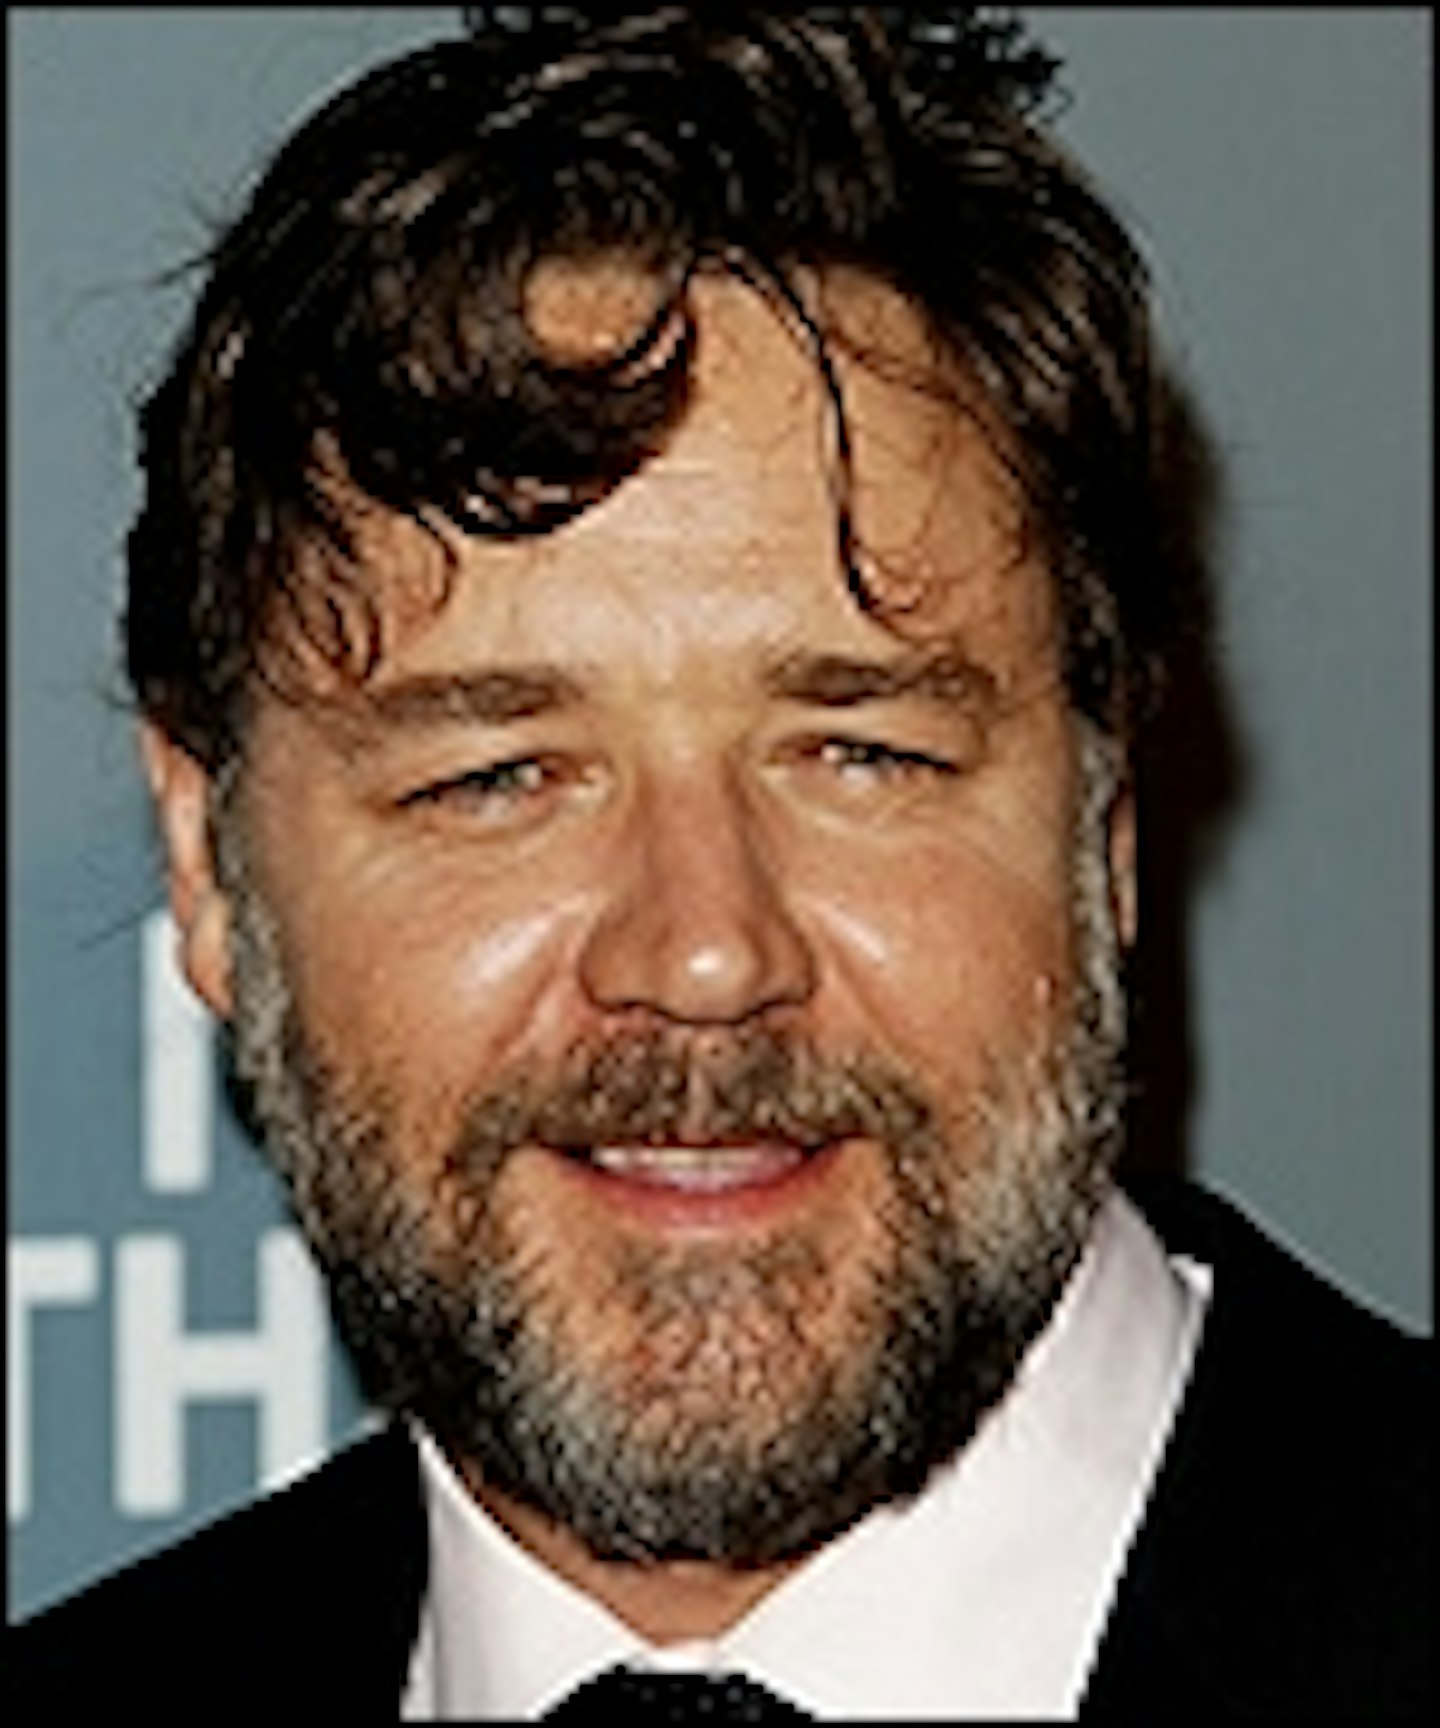 Russell Crowe To Tell A Winter's Tale?